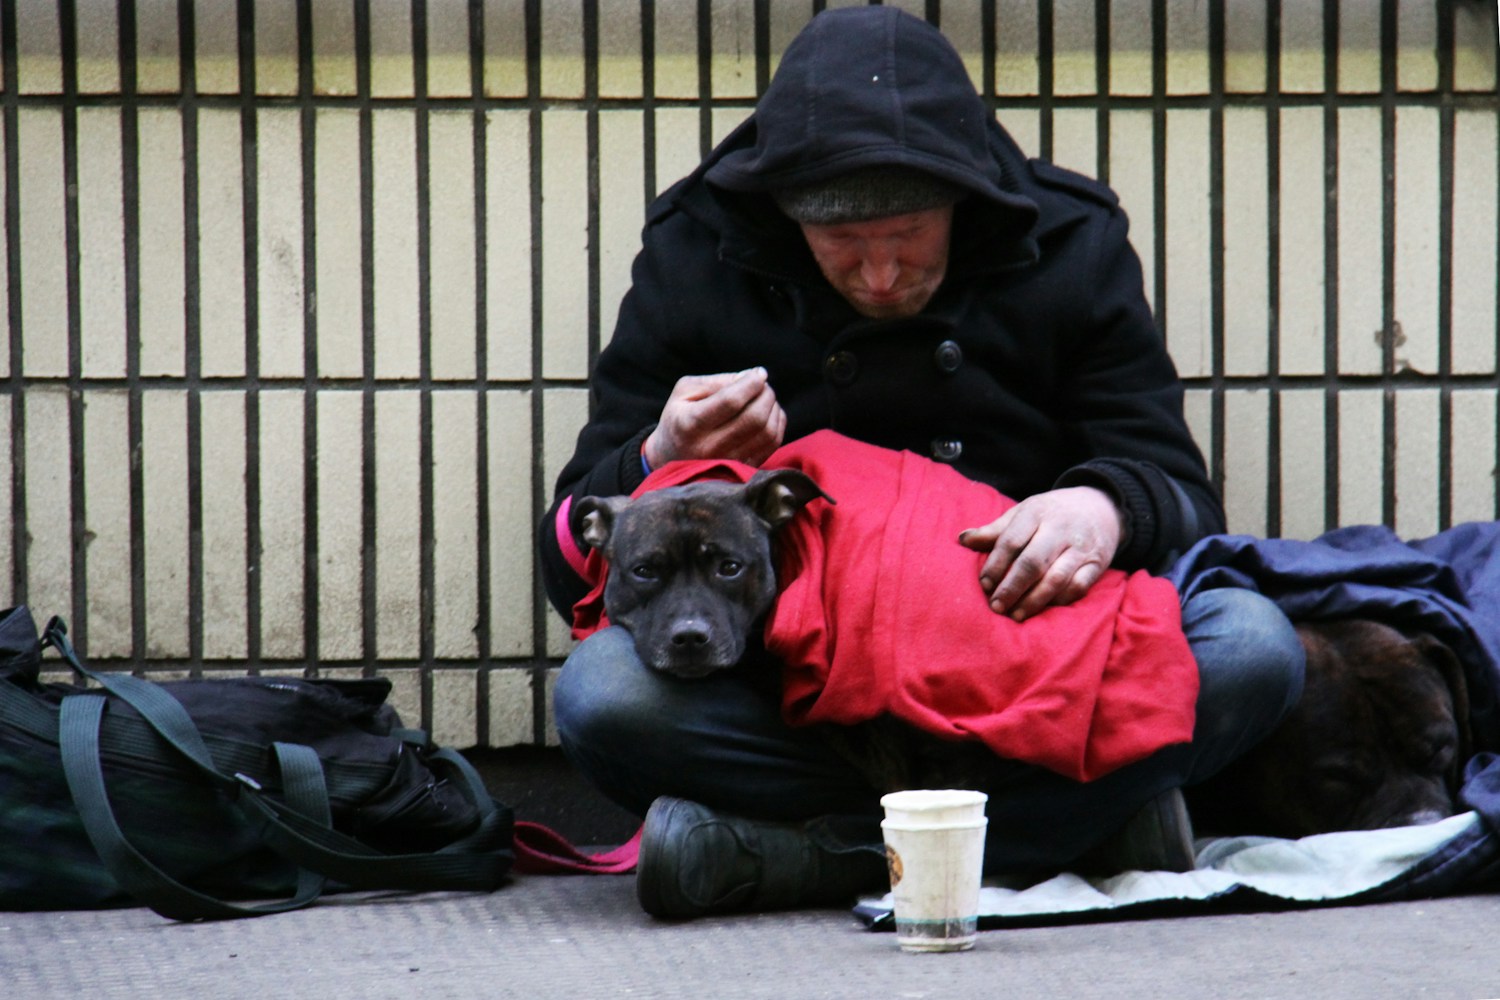 Pets of people experiencing homelessness are as well taken care of as any other animals, study indicates